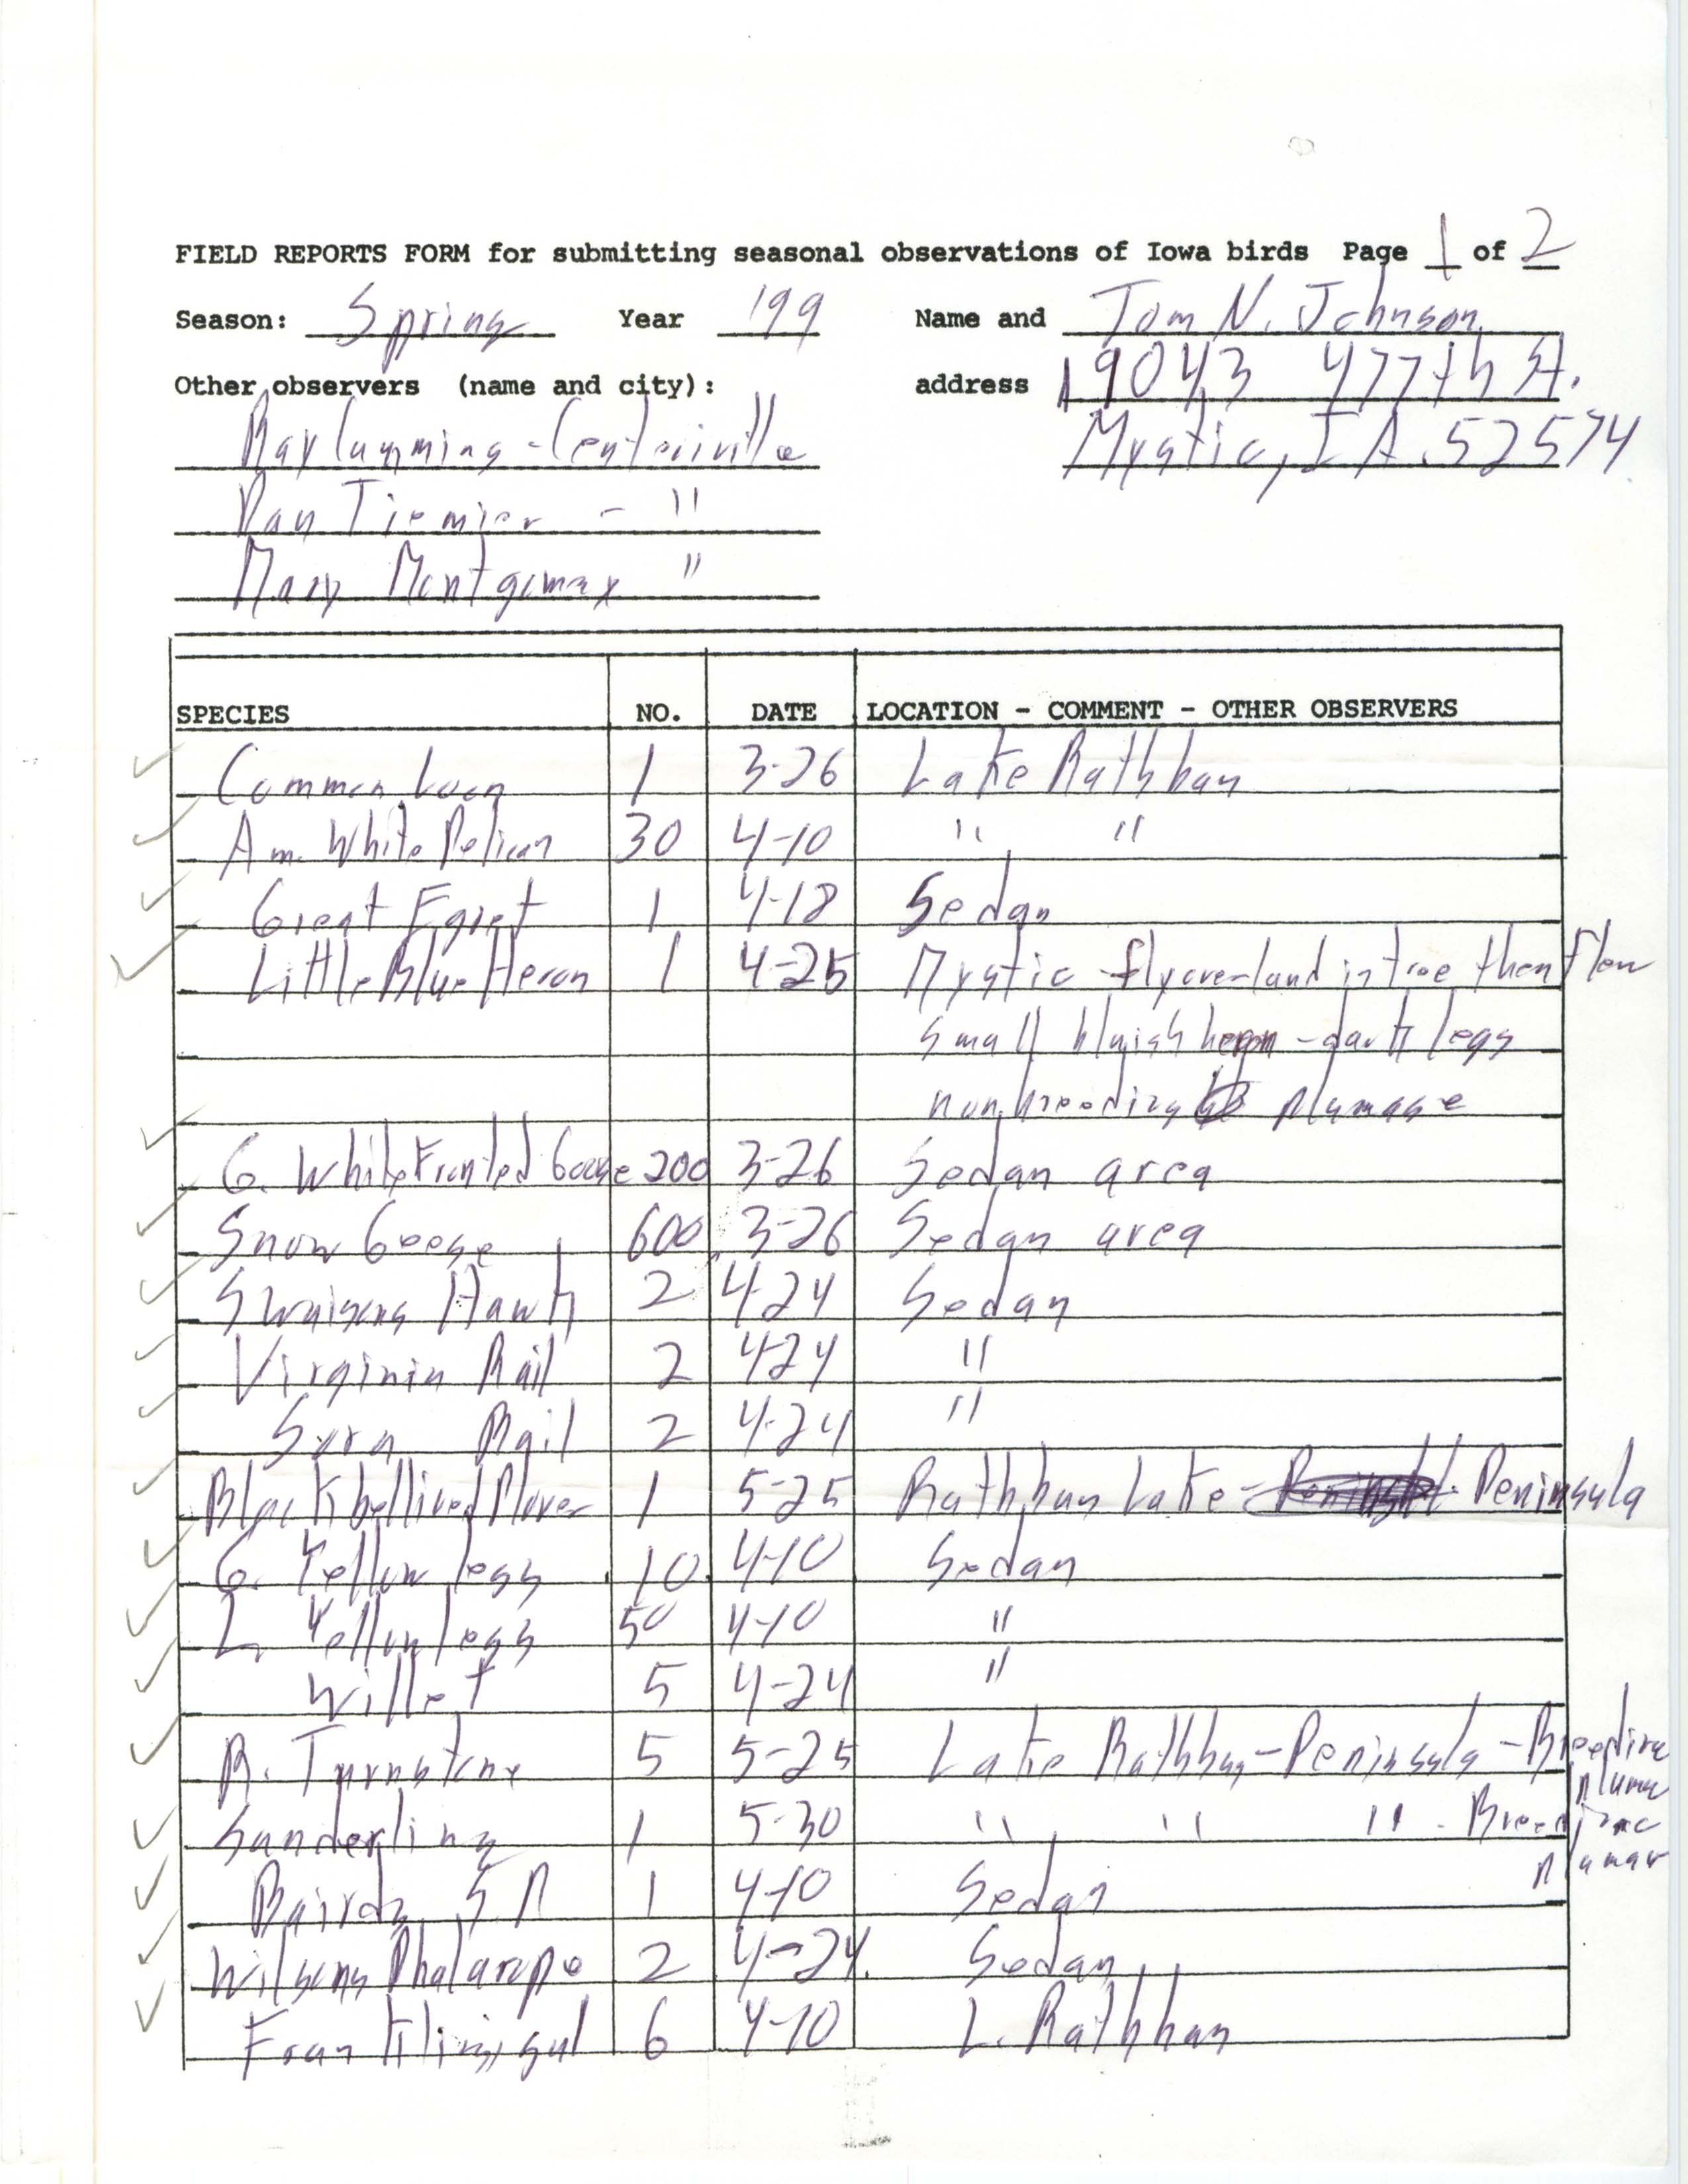 Field reports form for submitting seasonal observations of Iowa birds, Tom Johnson, spring 1999